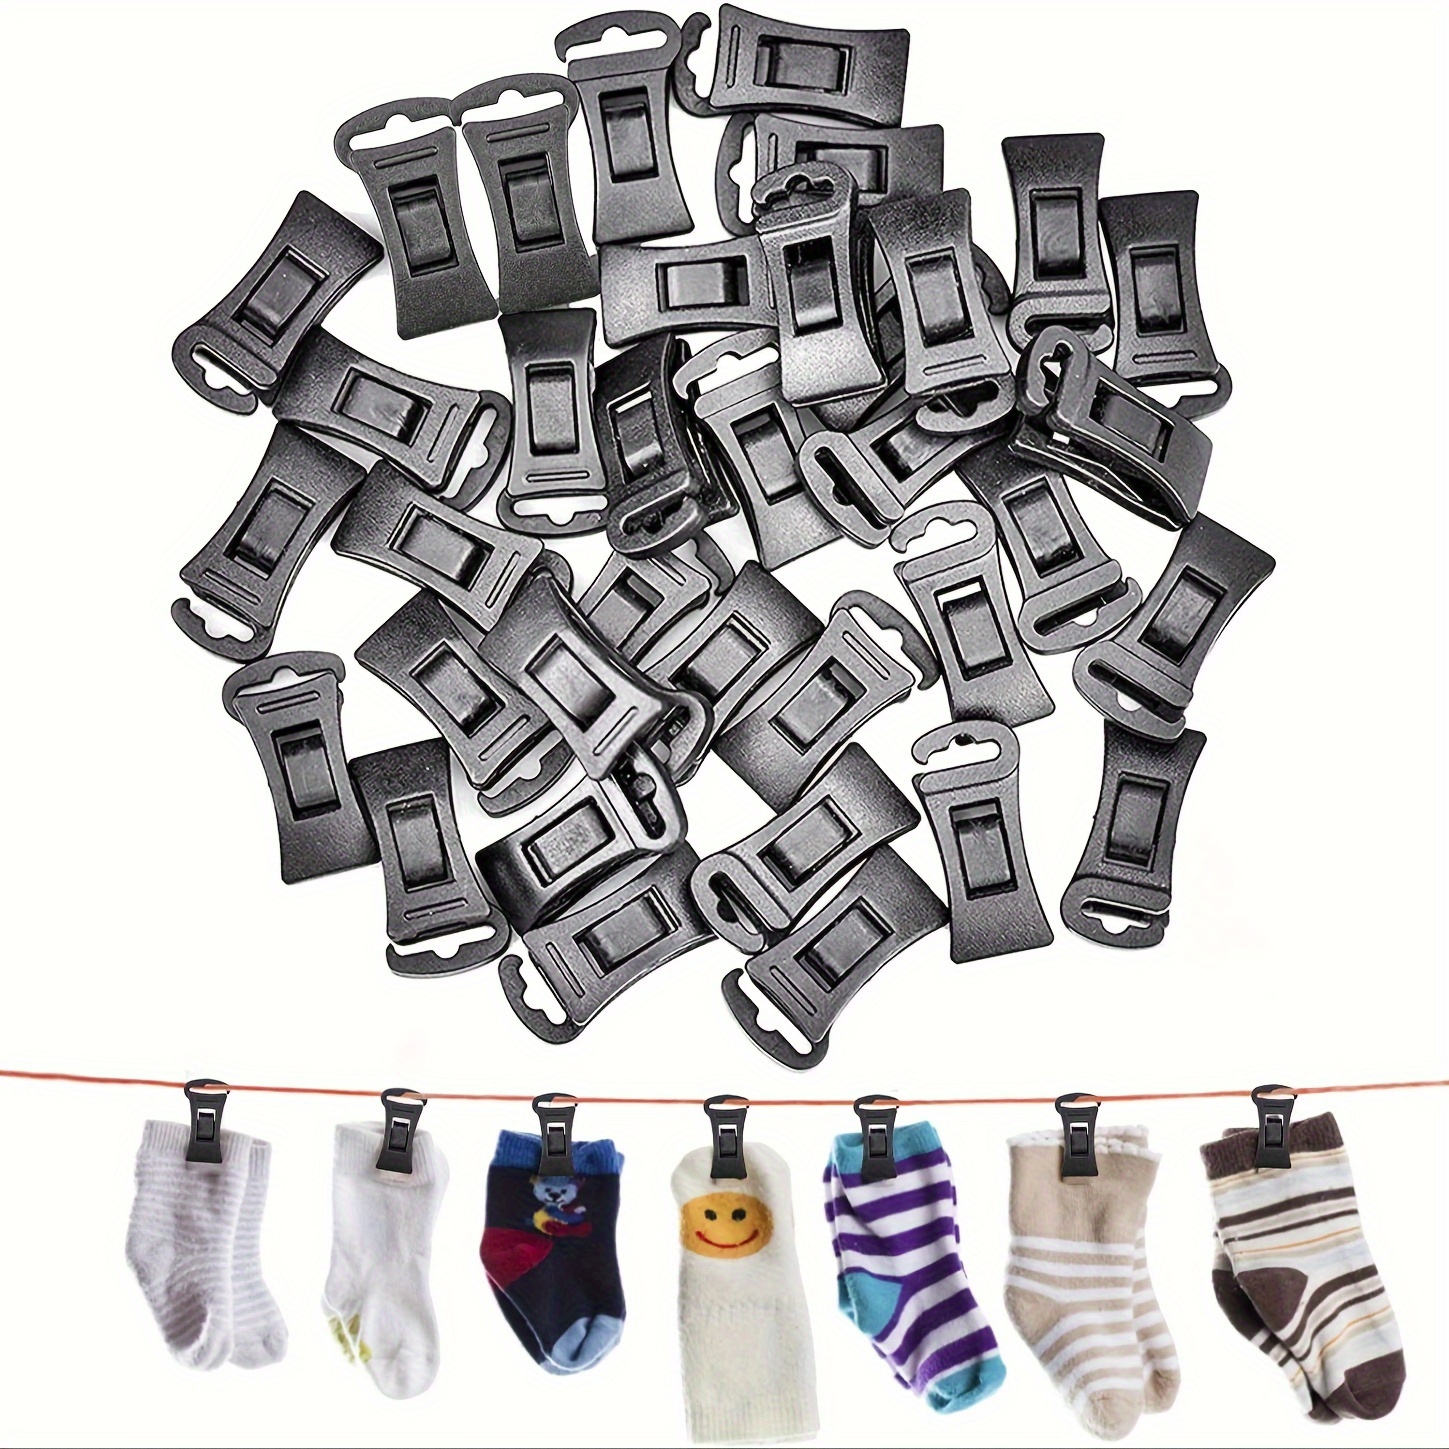 

40-pack Plastic Sock Clips With Strong Grip, Anti-slip Sock Organizers For Washer, Dryer, And Drawer, Space-saving Sock Holders With Hooks For Laundry And Drying, No-fold Sock Hangers